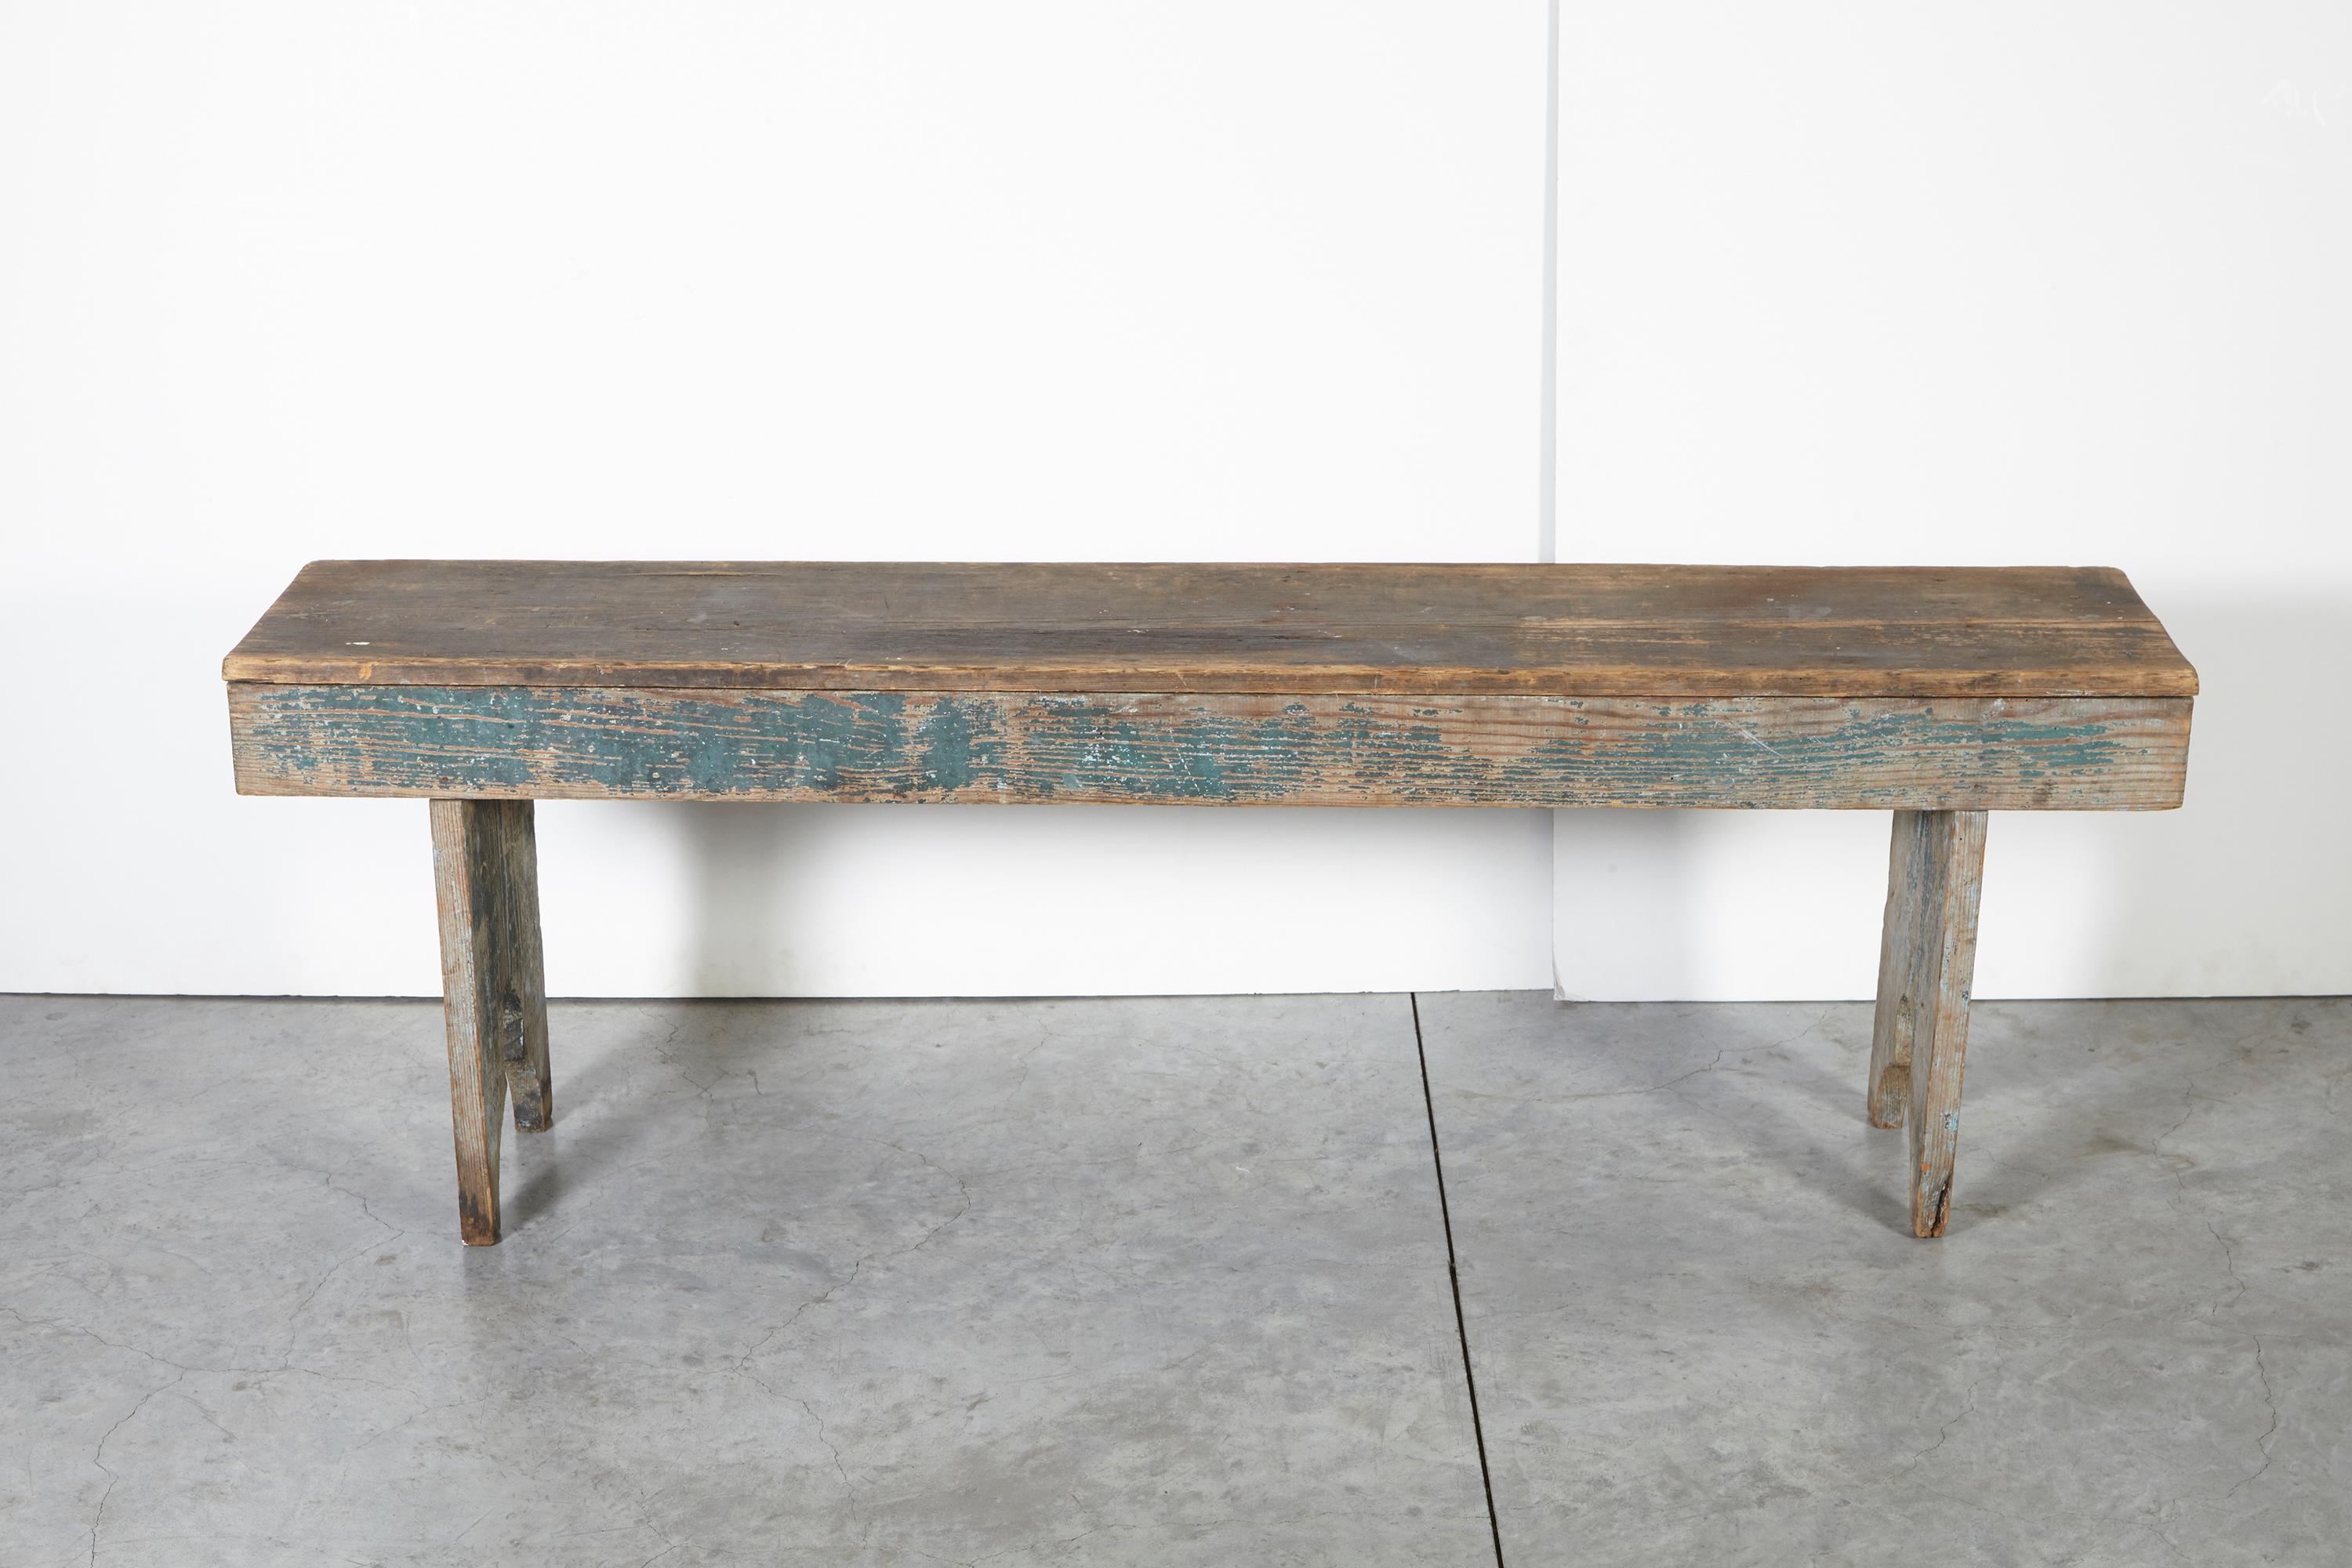 A simple, country bench with beautifully worn blue paint and clean lines. Will add warmth and history to any space.
CA189.